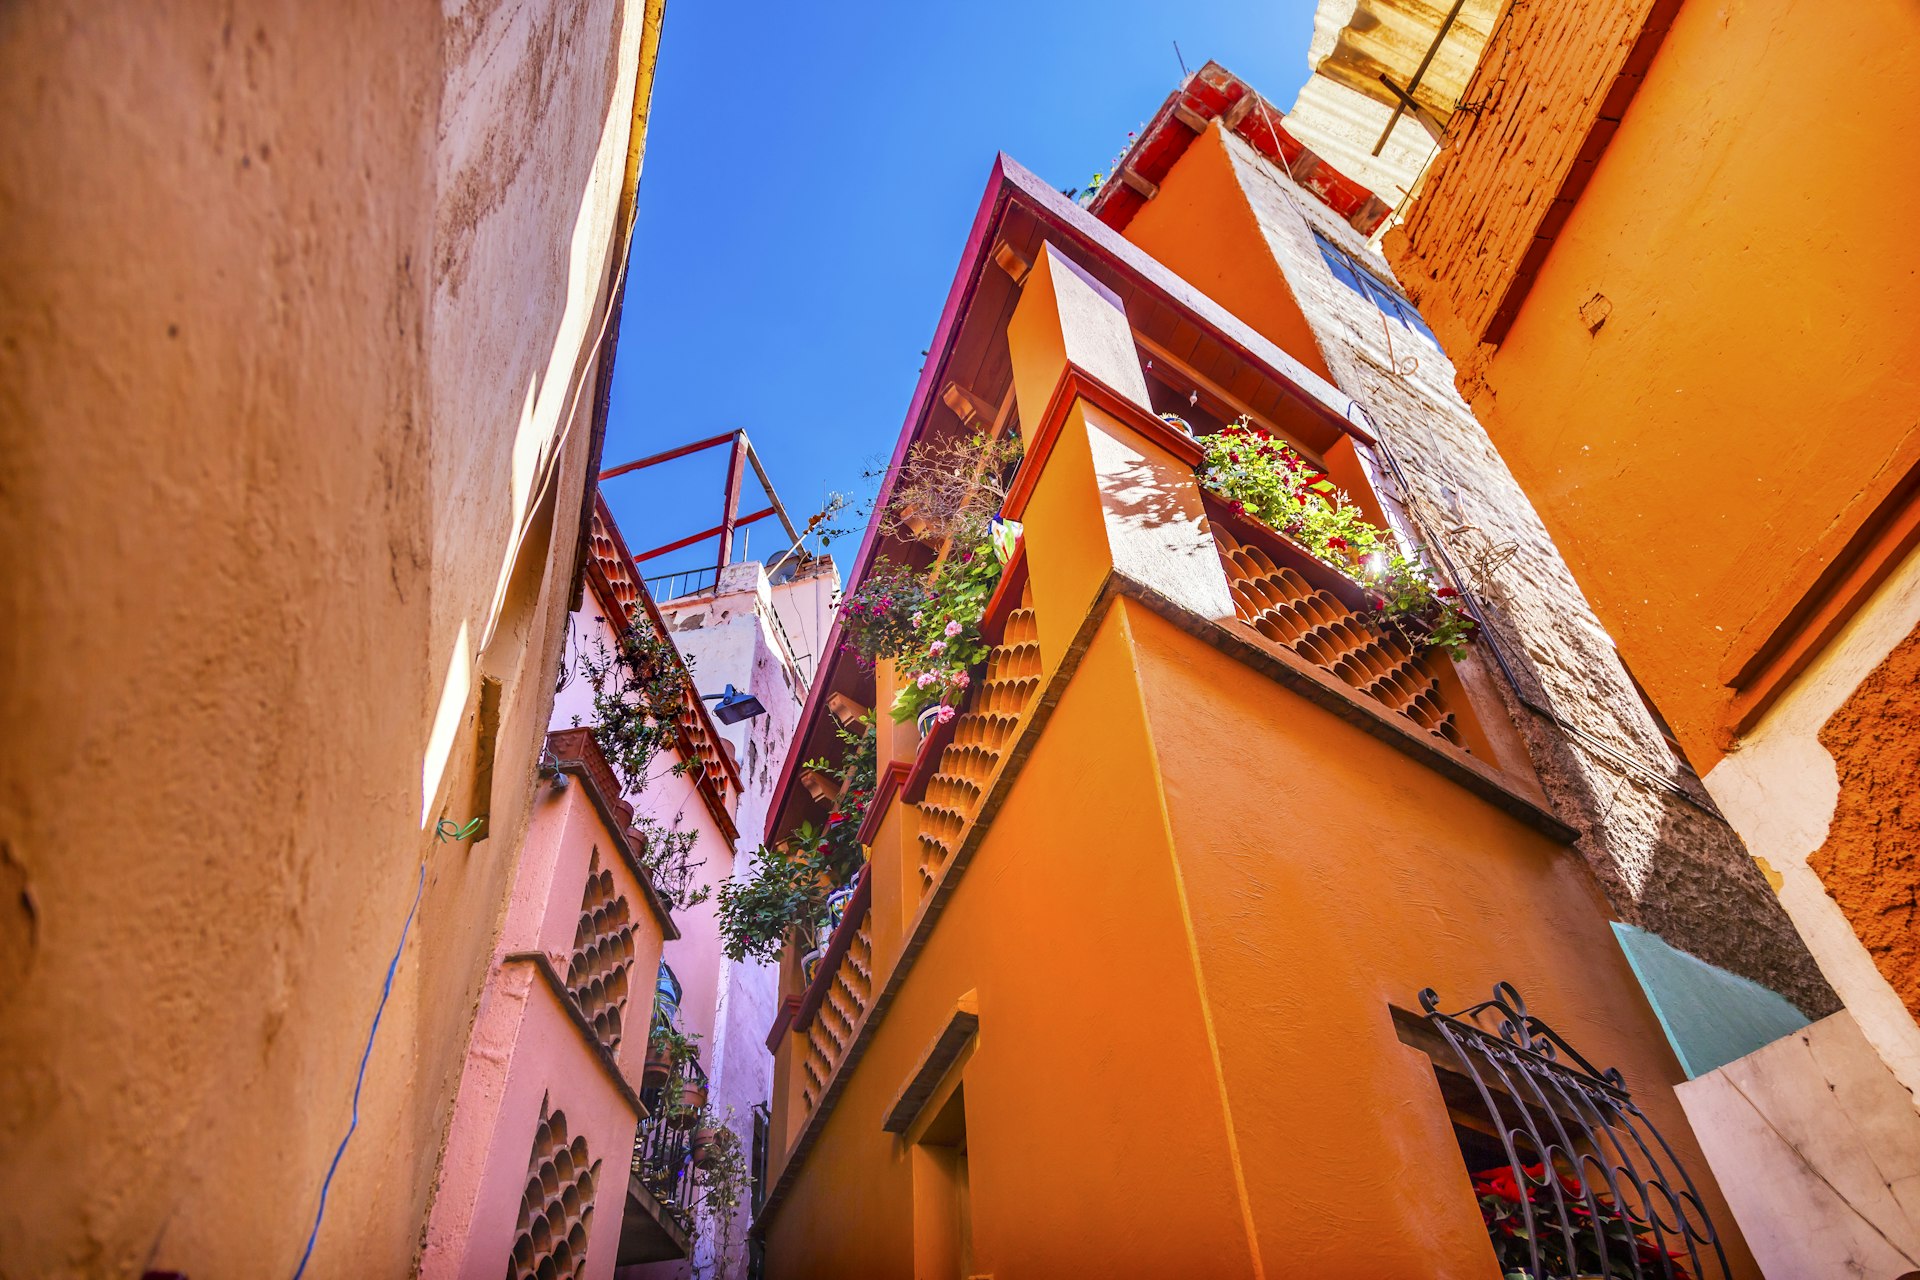 Kiss Alley Alleyway Colored Houses Guanajuato Mexico. Houses so close couple can exchange a kiss between balconies